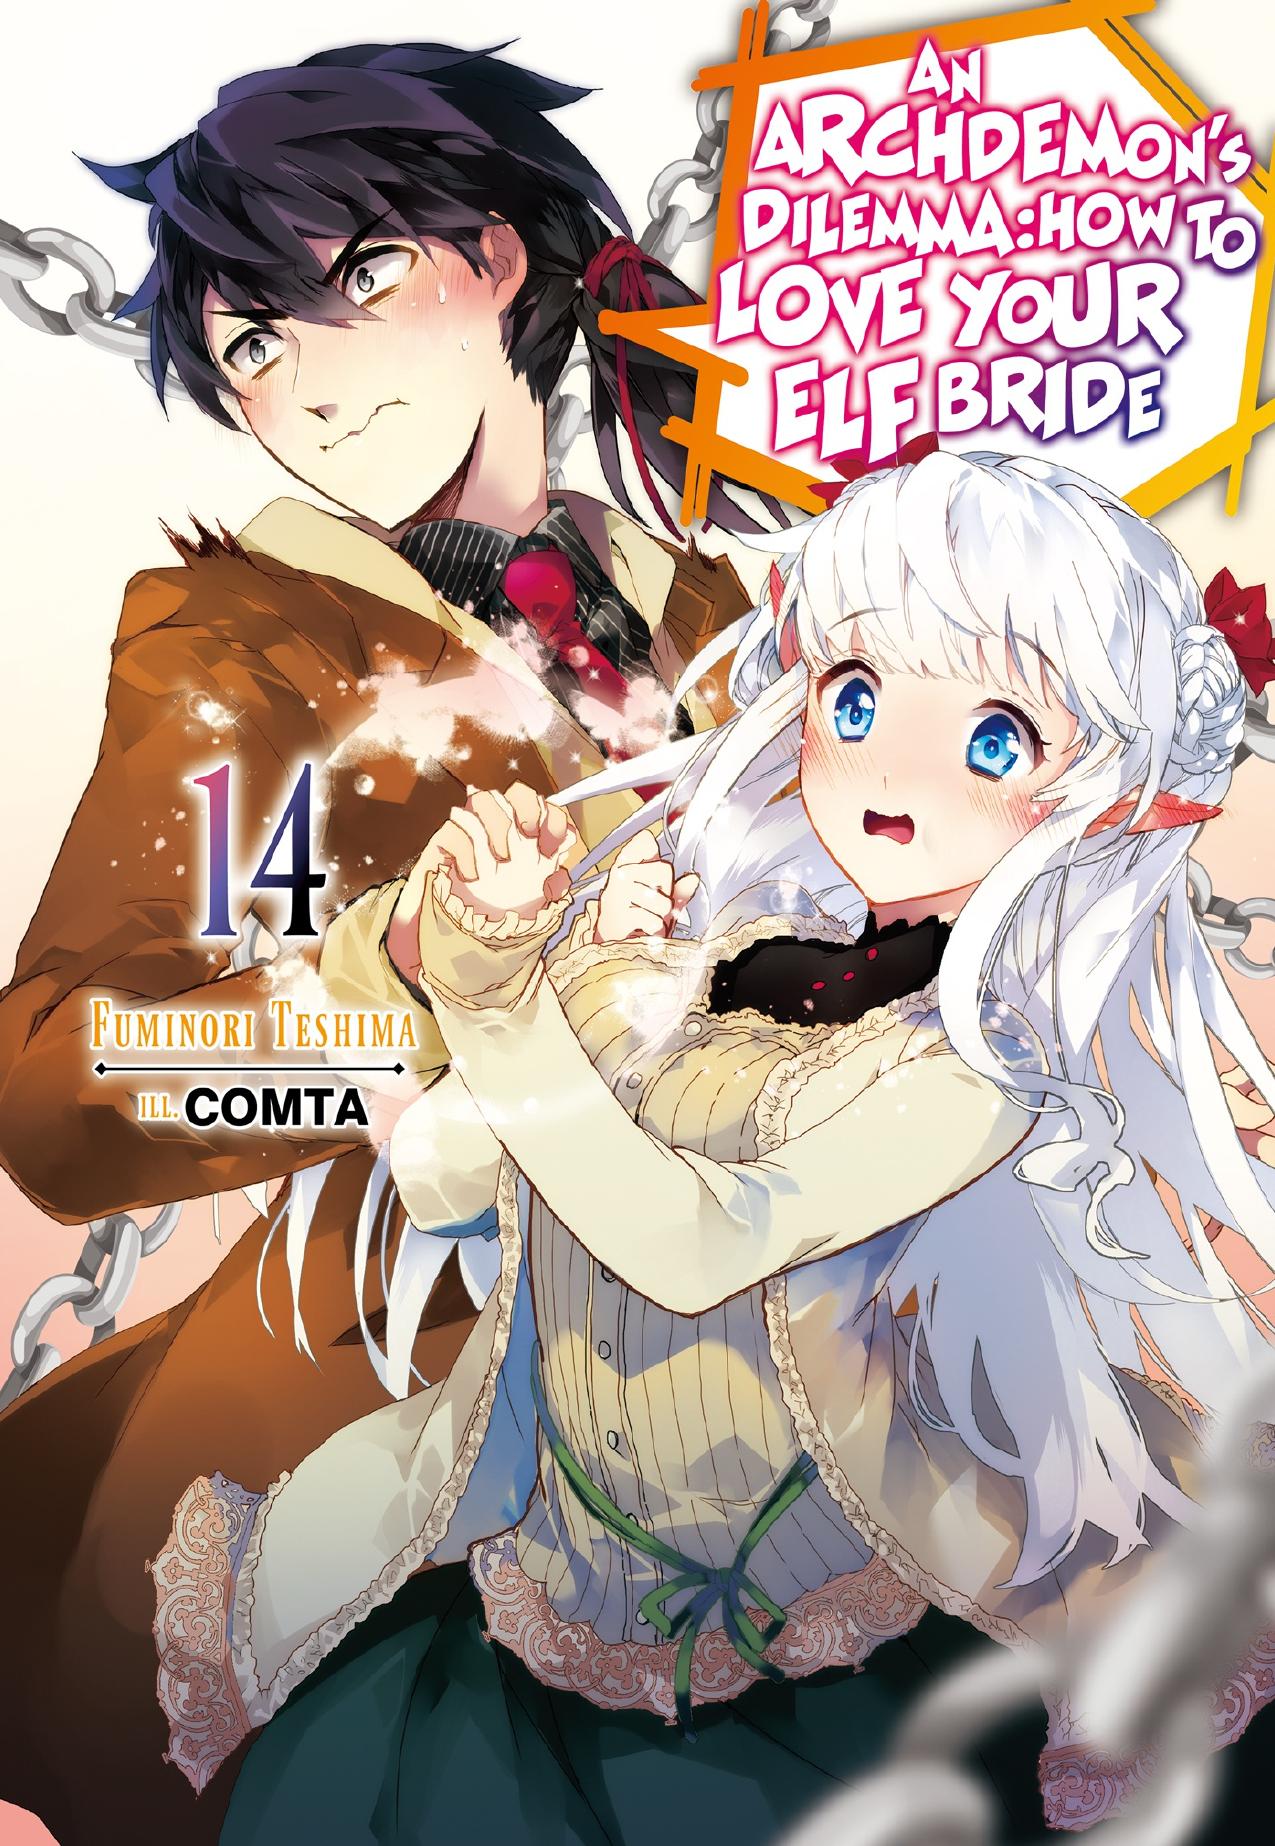 An Archdemon's Dilemma: How to Love Your Elf Bride: Volume 14 by Fuminori Teshima